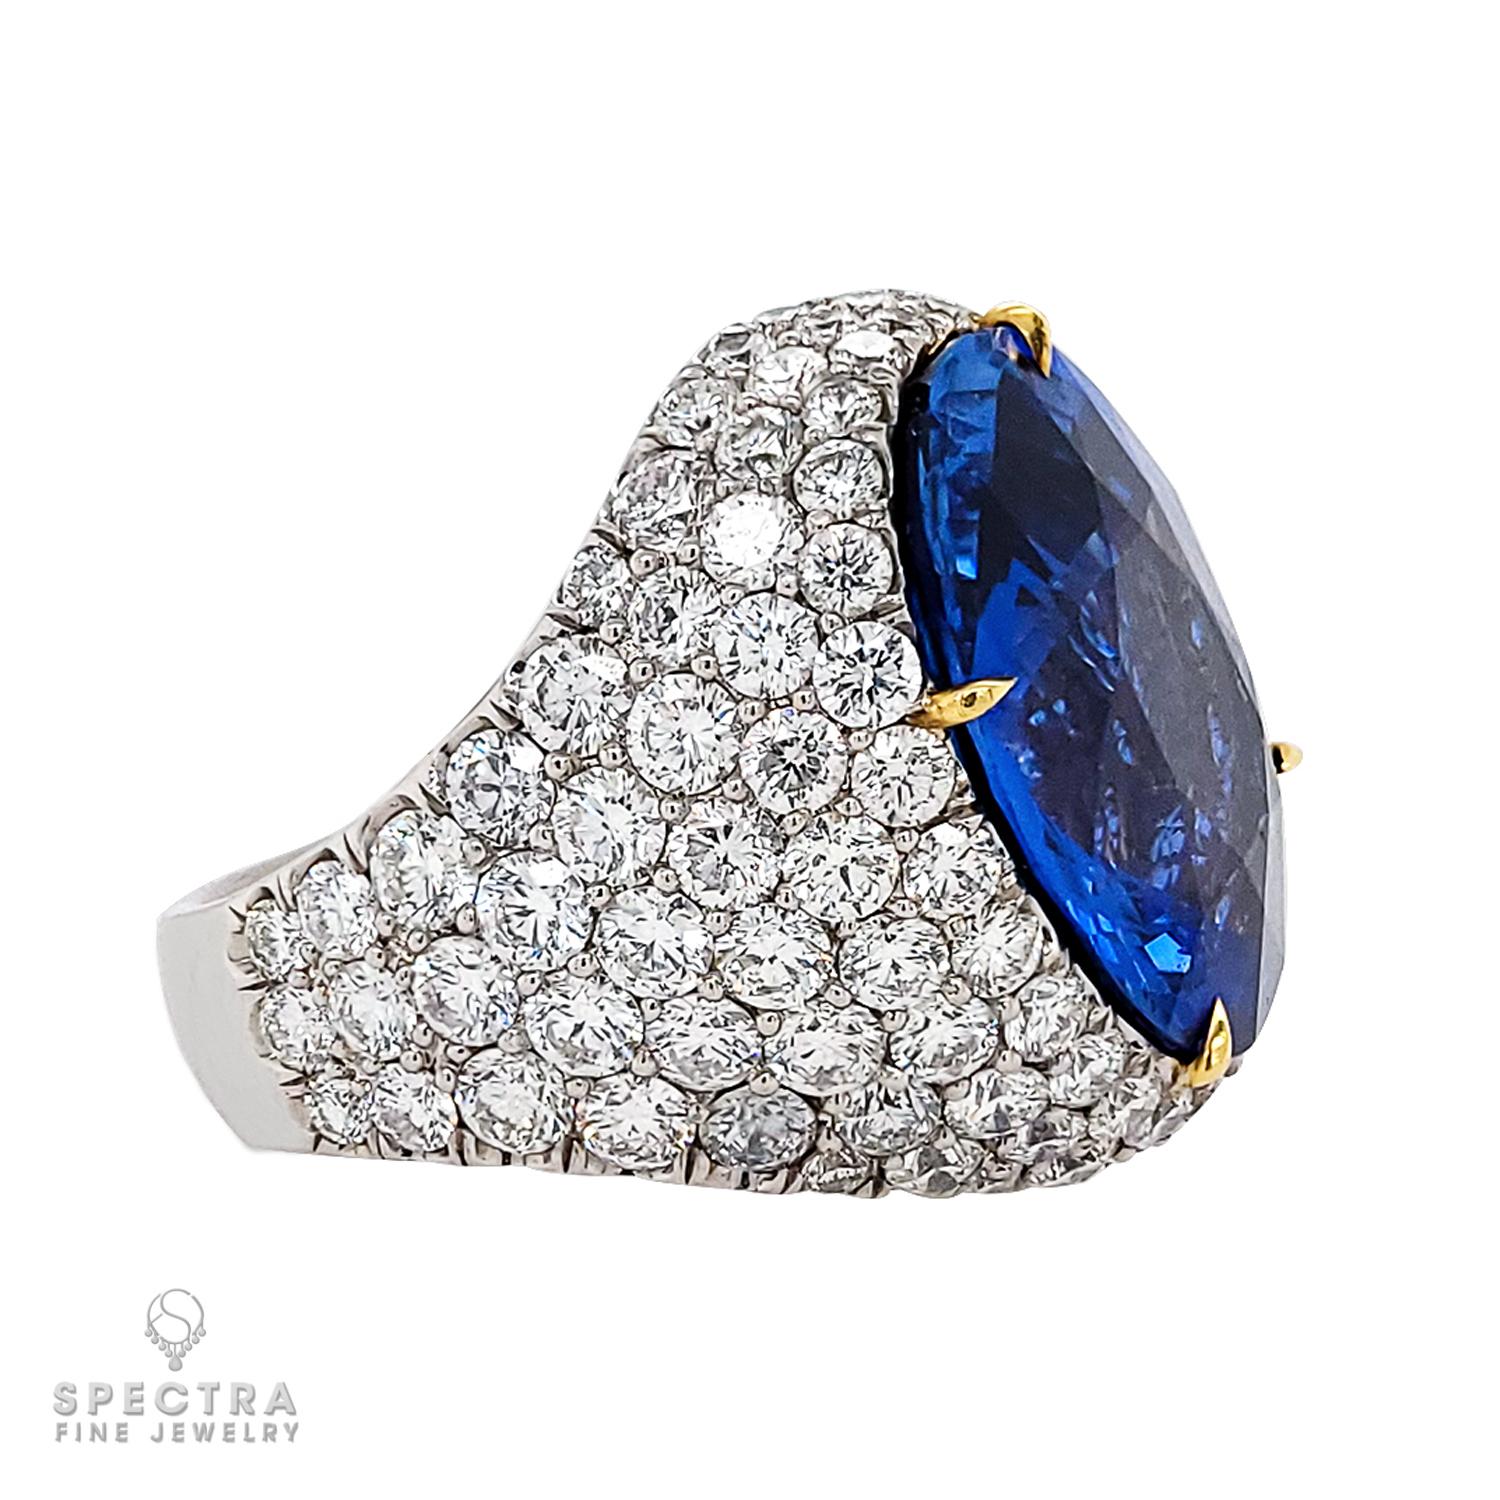 A gorgeous cocktail ring depicting an oval blue sapphire and diamonds set in platinum. The weight of the sapphire is 29.83 carats. It's certified by GRS Lab stating that the stone is of Sri-Lankan origin with the indication of heating.
The sapphire